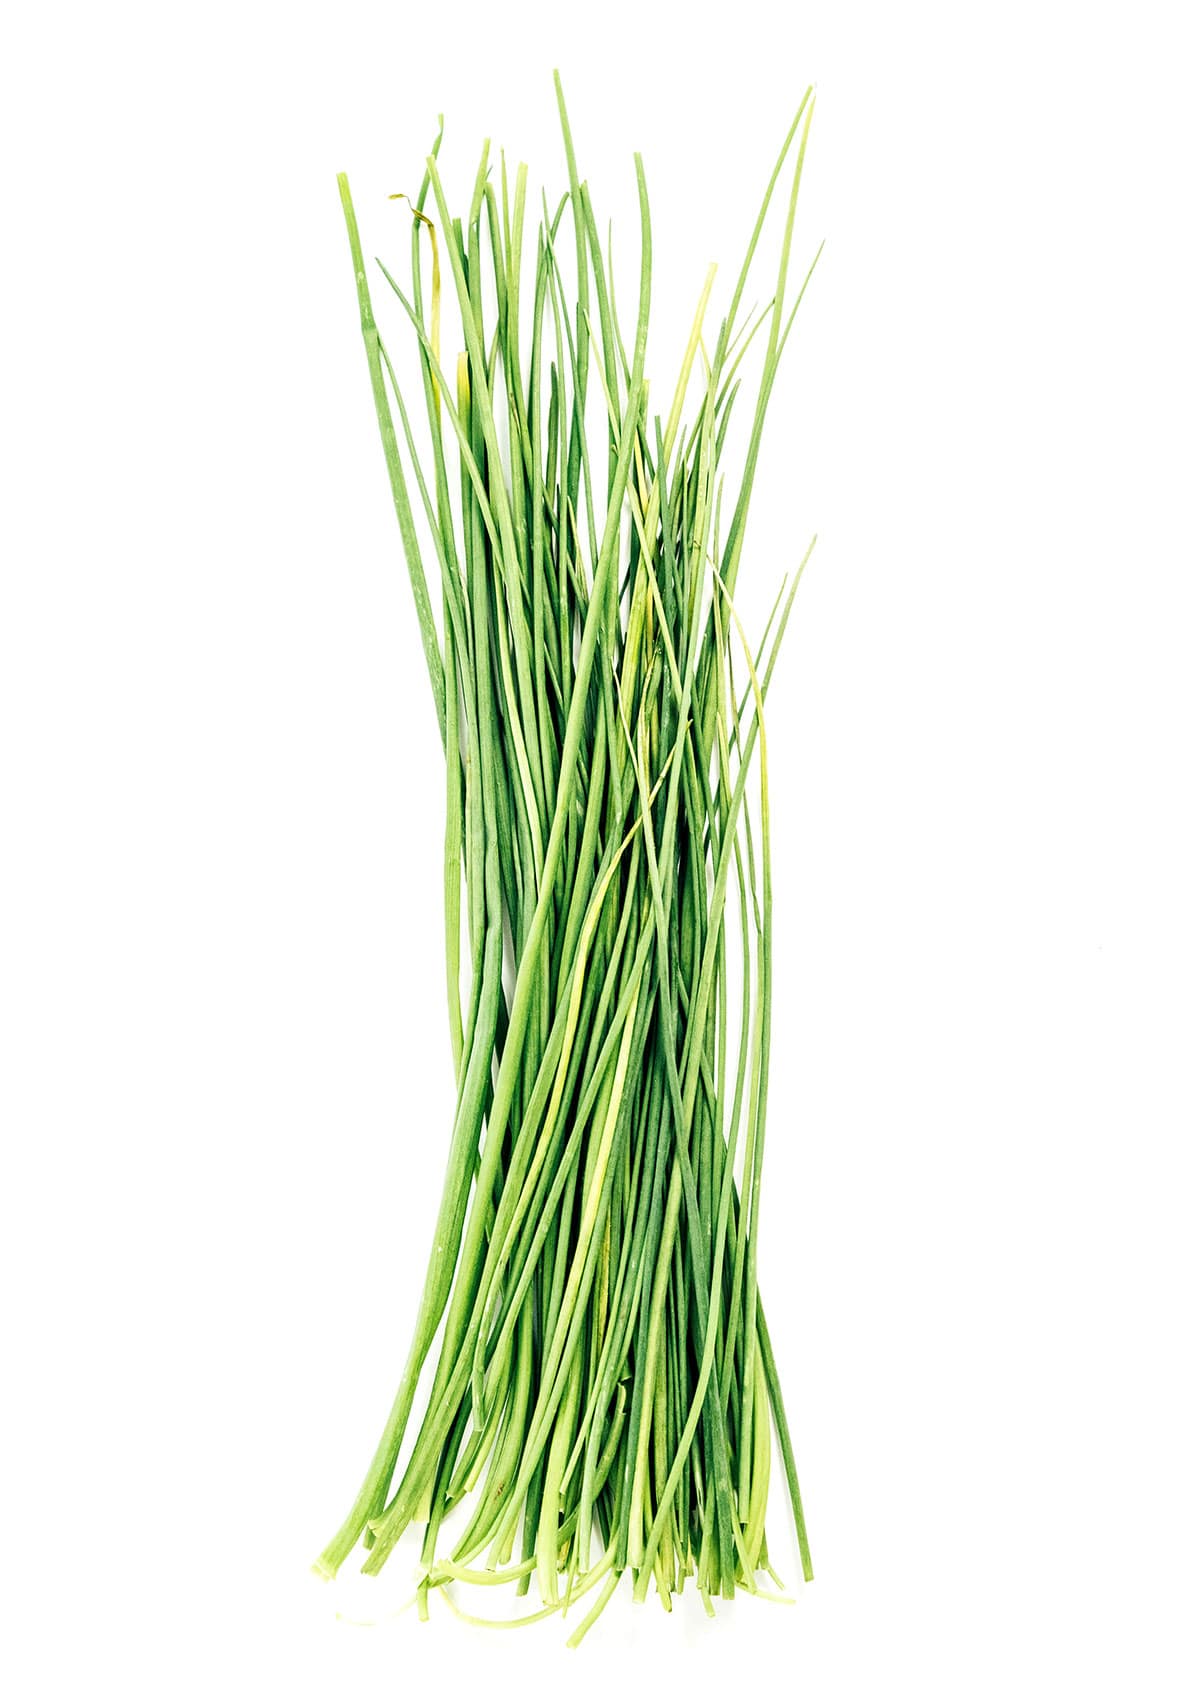 Chives in a glass jar on a white background.